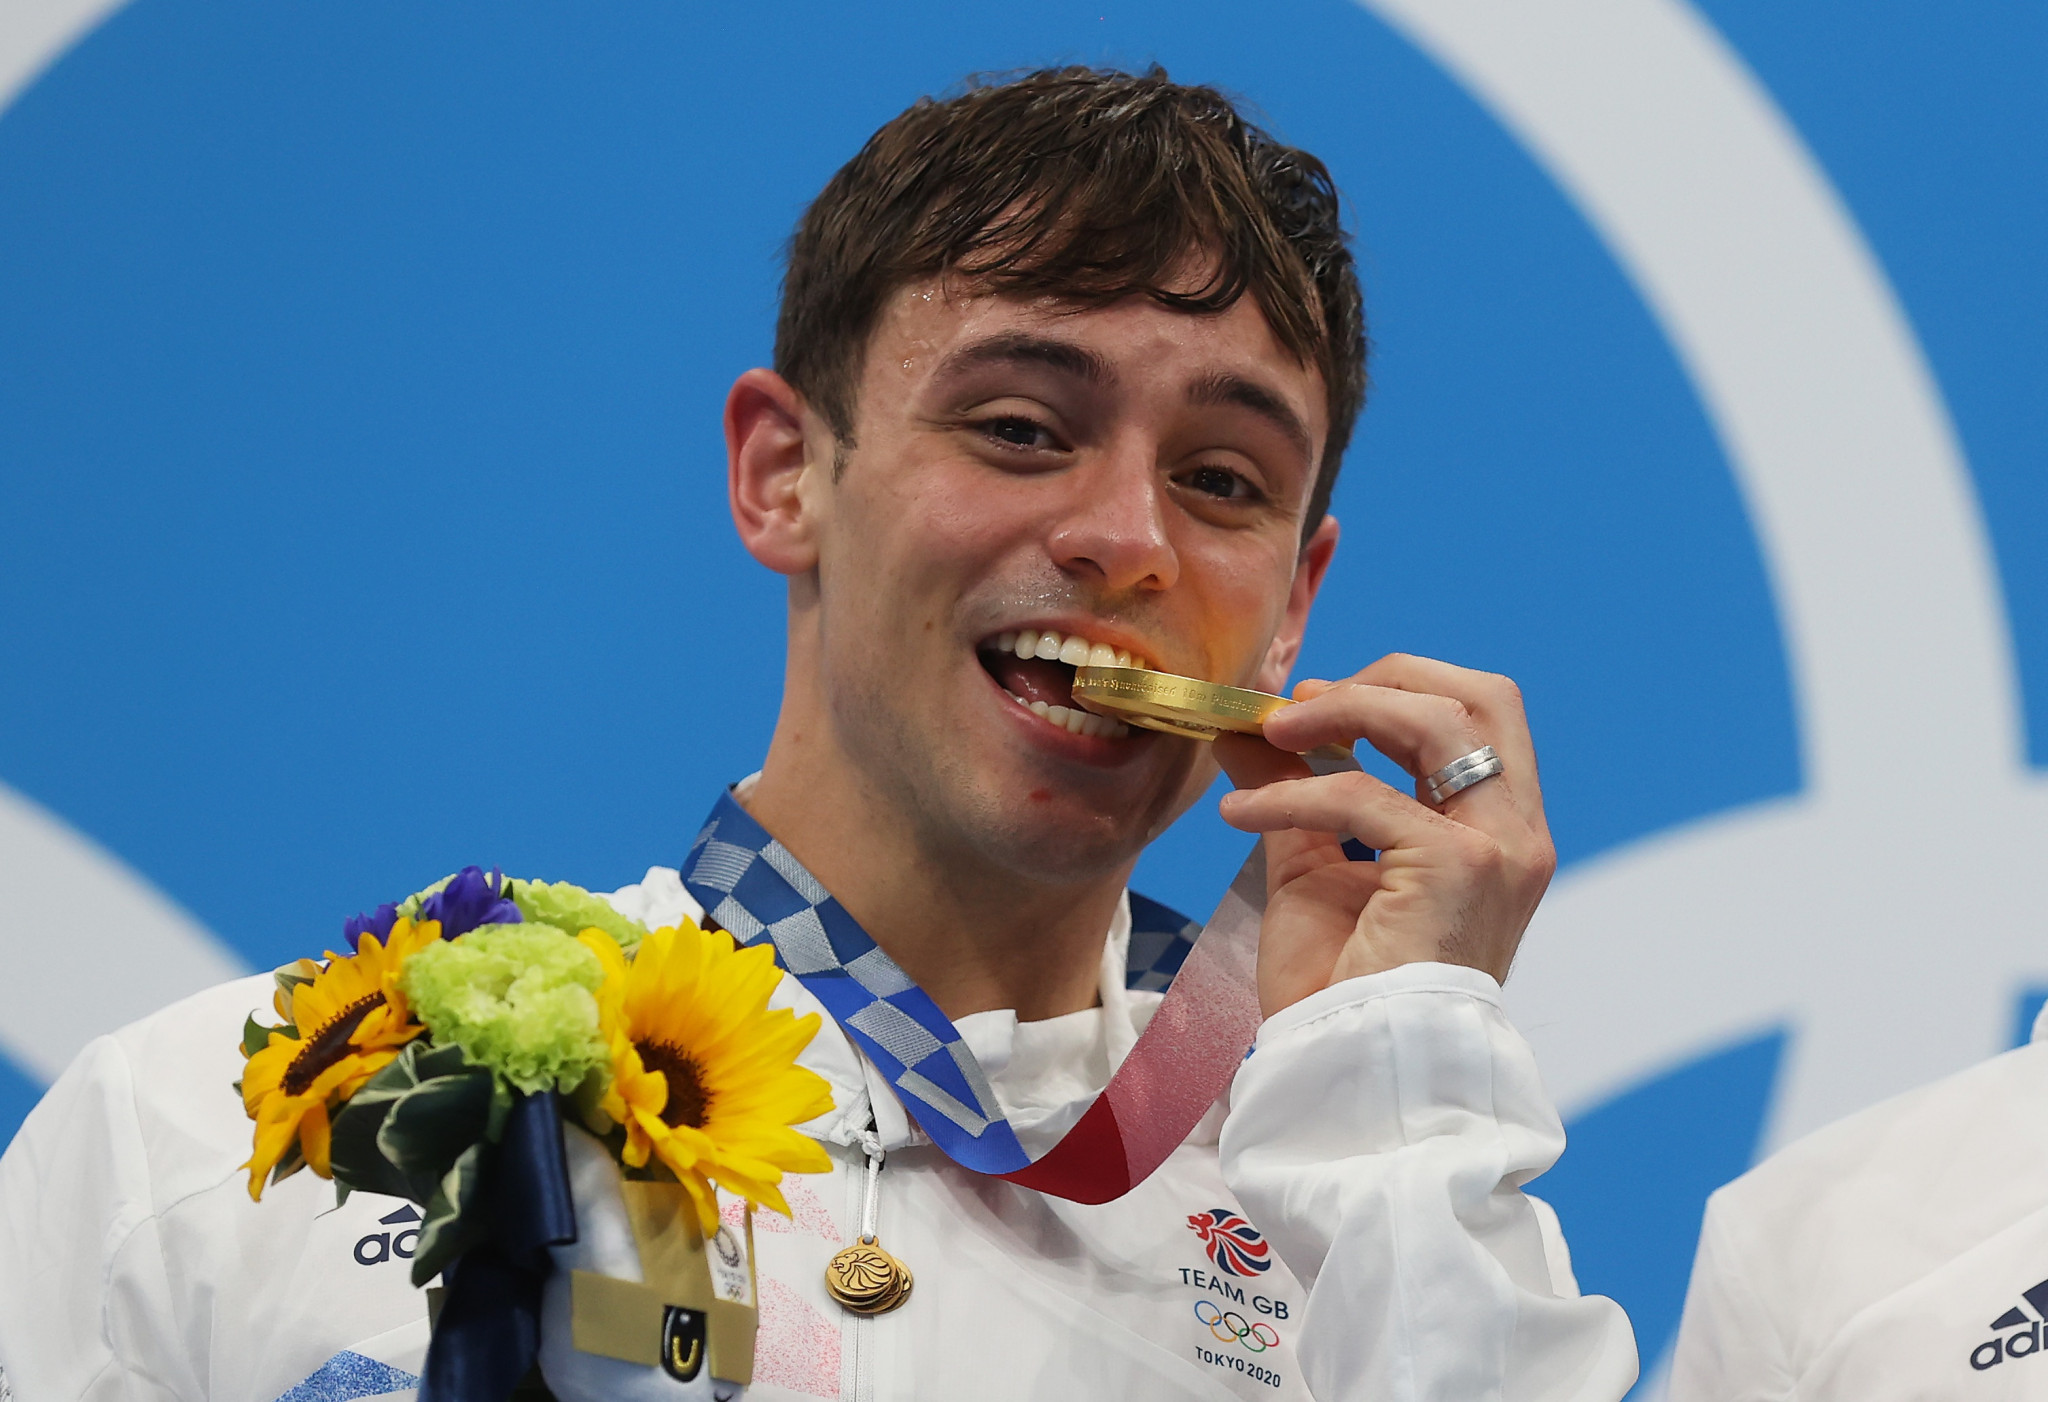 Tom Daley has previously called for the Commonwealth to work towards changing attitudes to LGBTQ people ©Getty Images